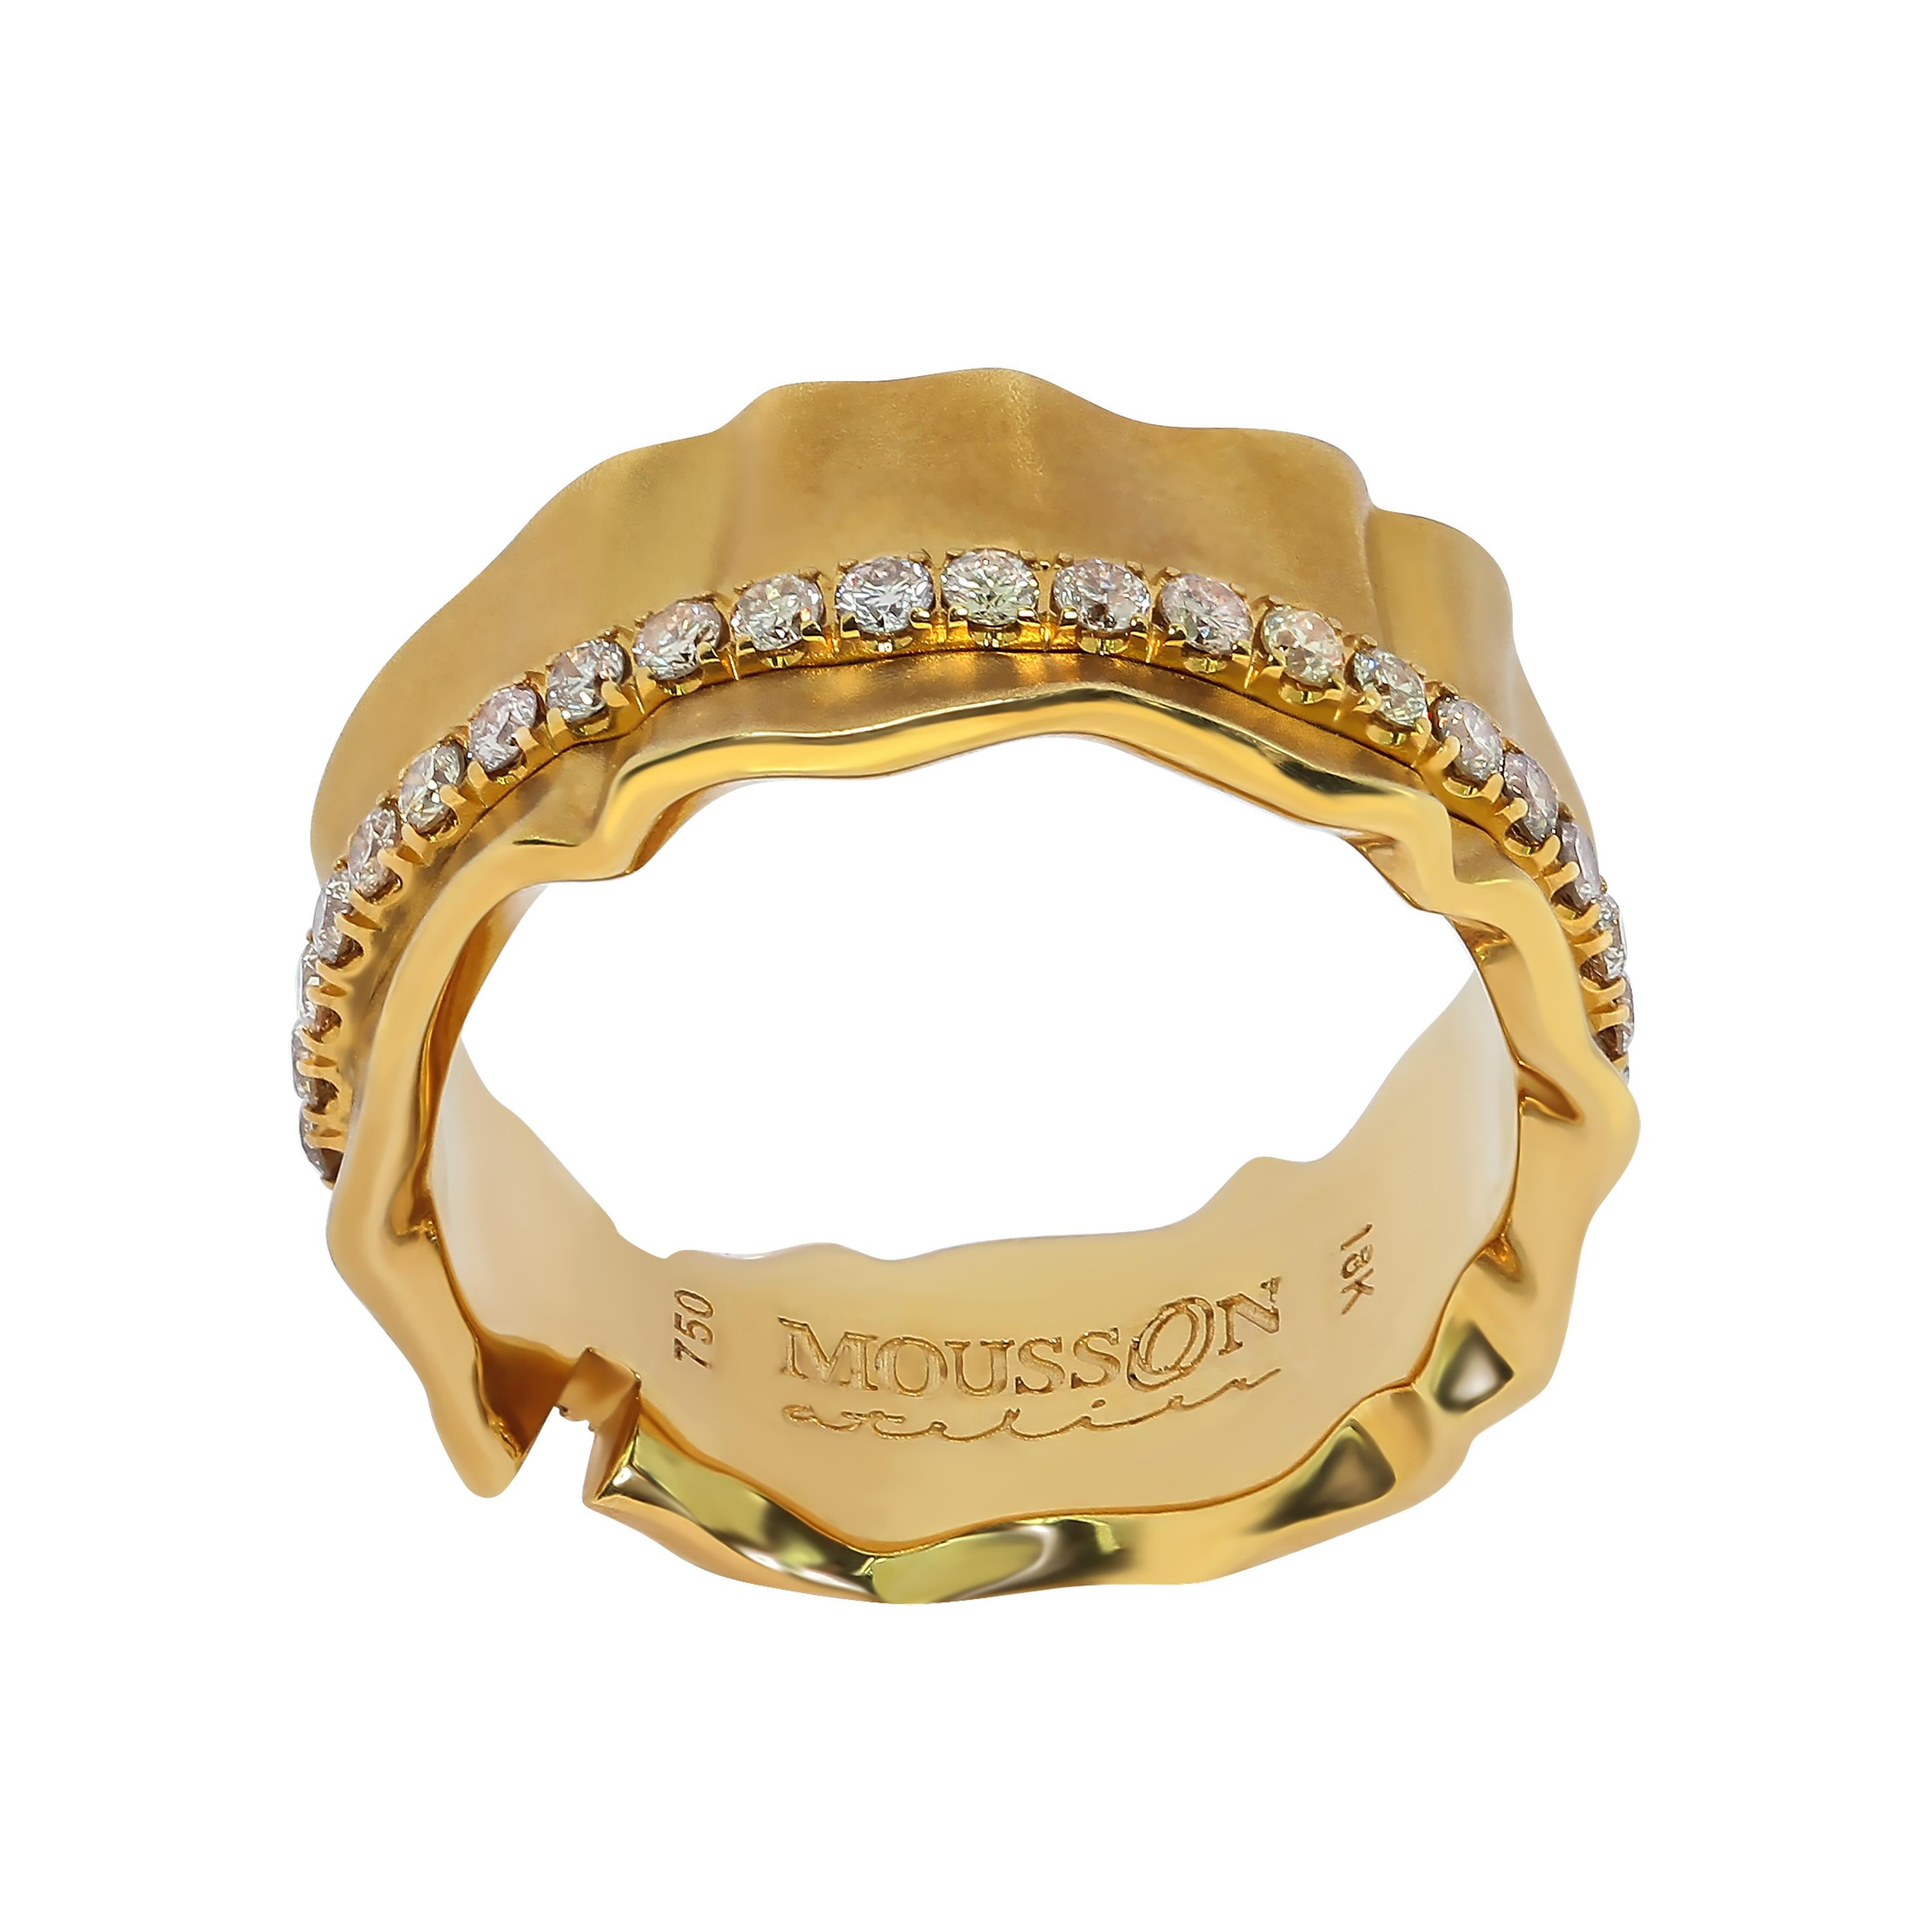 Champagne Diamonds 18 Karat Yellow Gold Pret-a-Porter Ring
Rings from Pret-a-Porter collection are the elegance of fabrics. This Ring is made as if of silk, which is pretty crumpled under the pressure of shiny 38 Champagne Diamonds. 